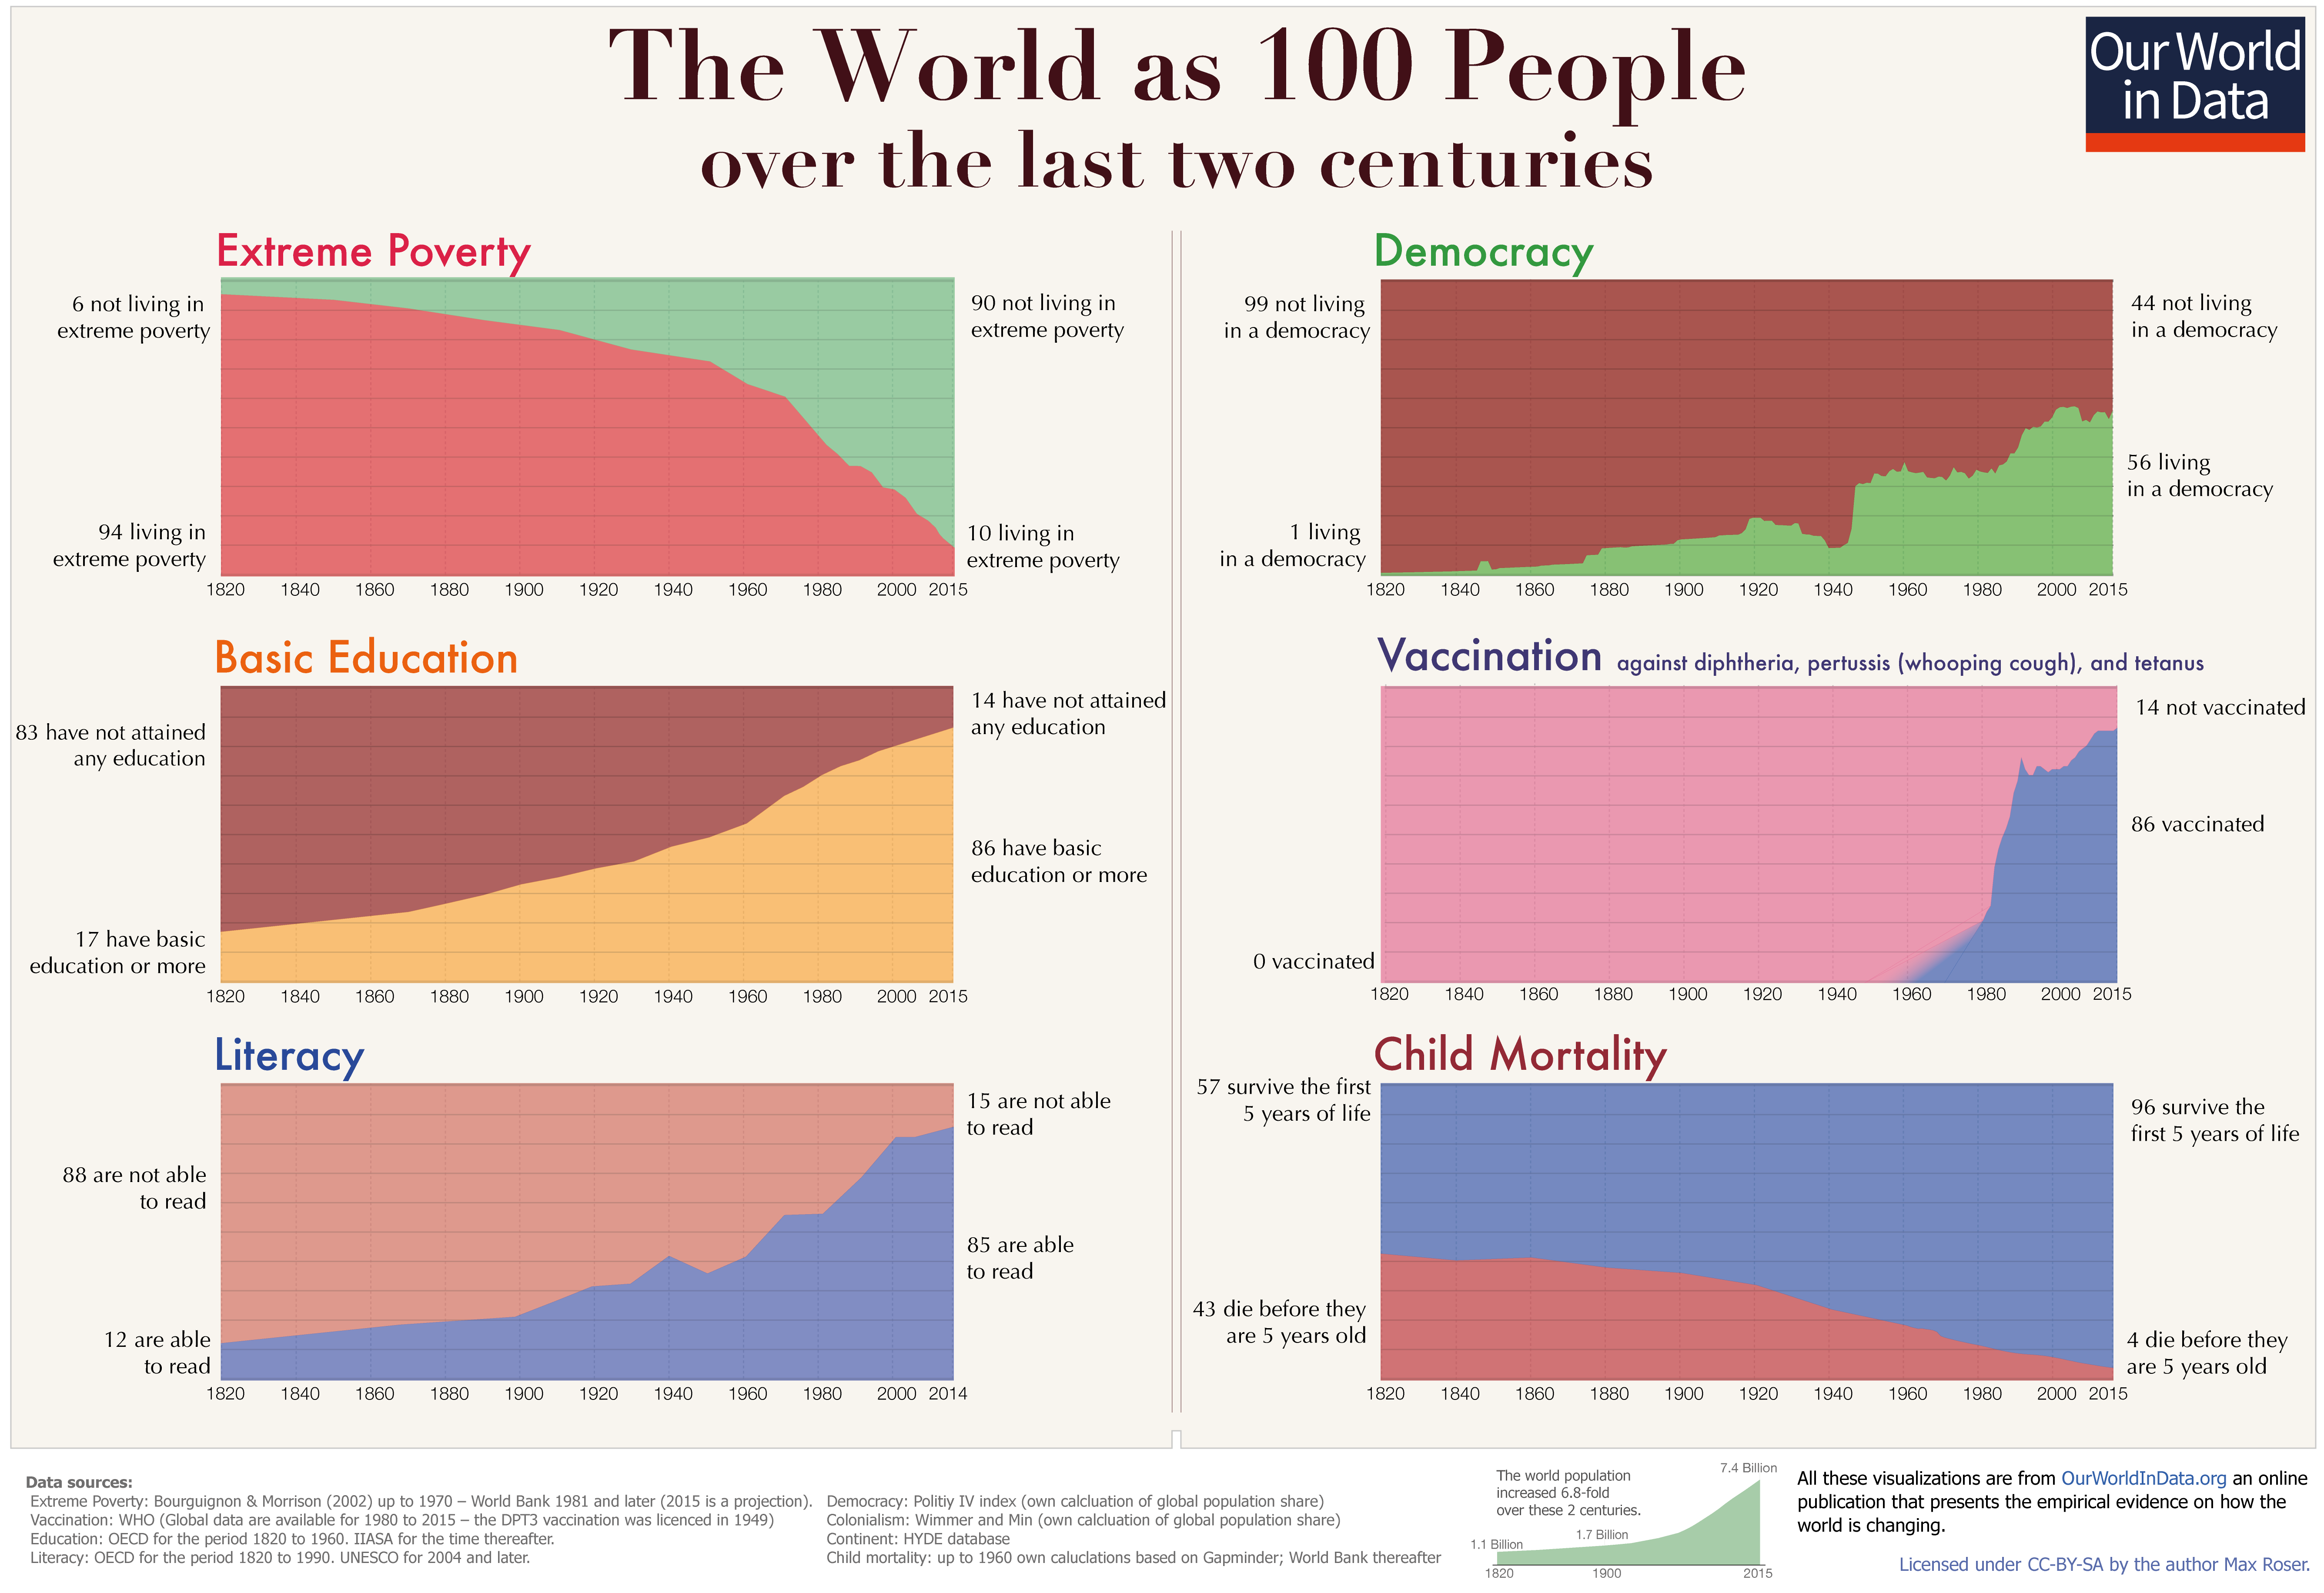 The world as 100 people. Source: Our World in Data. 